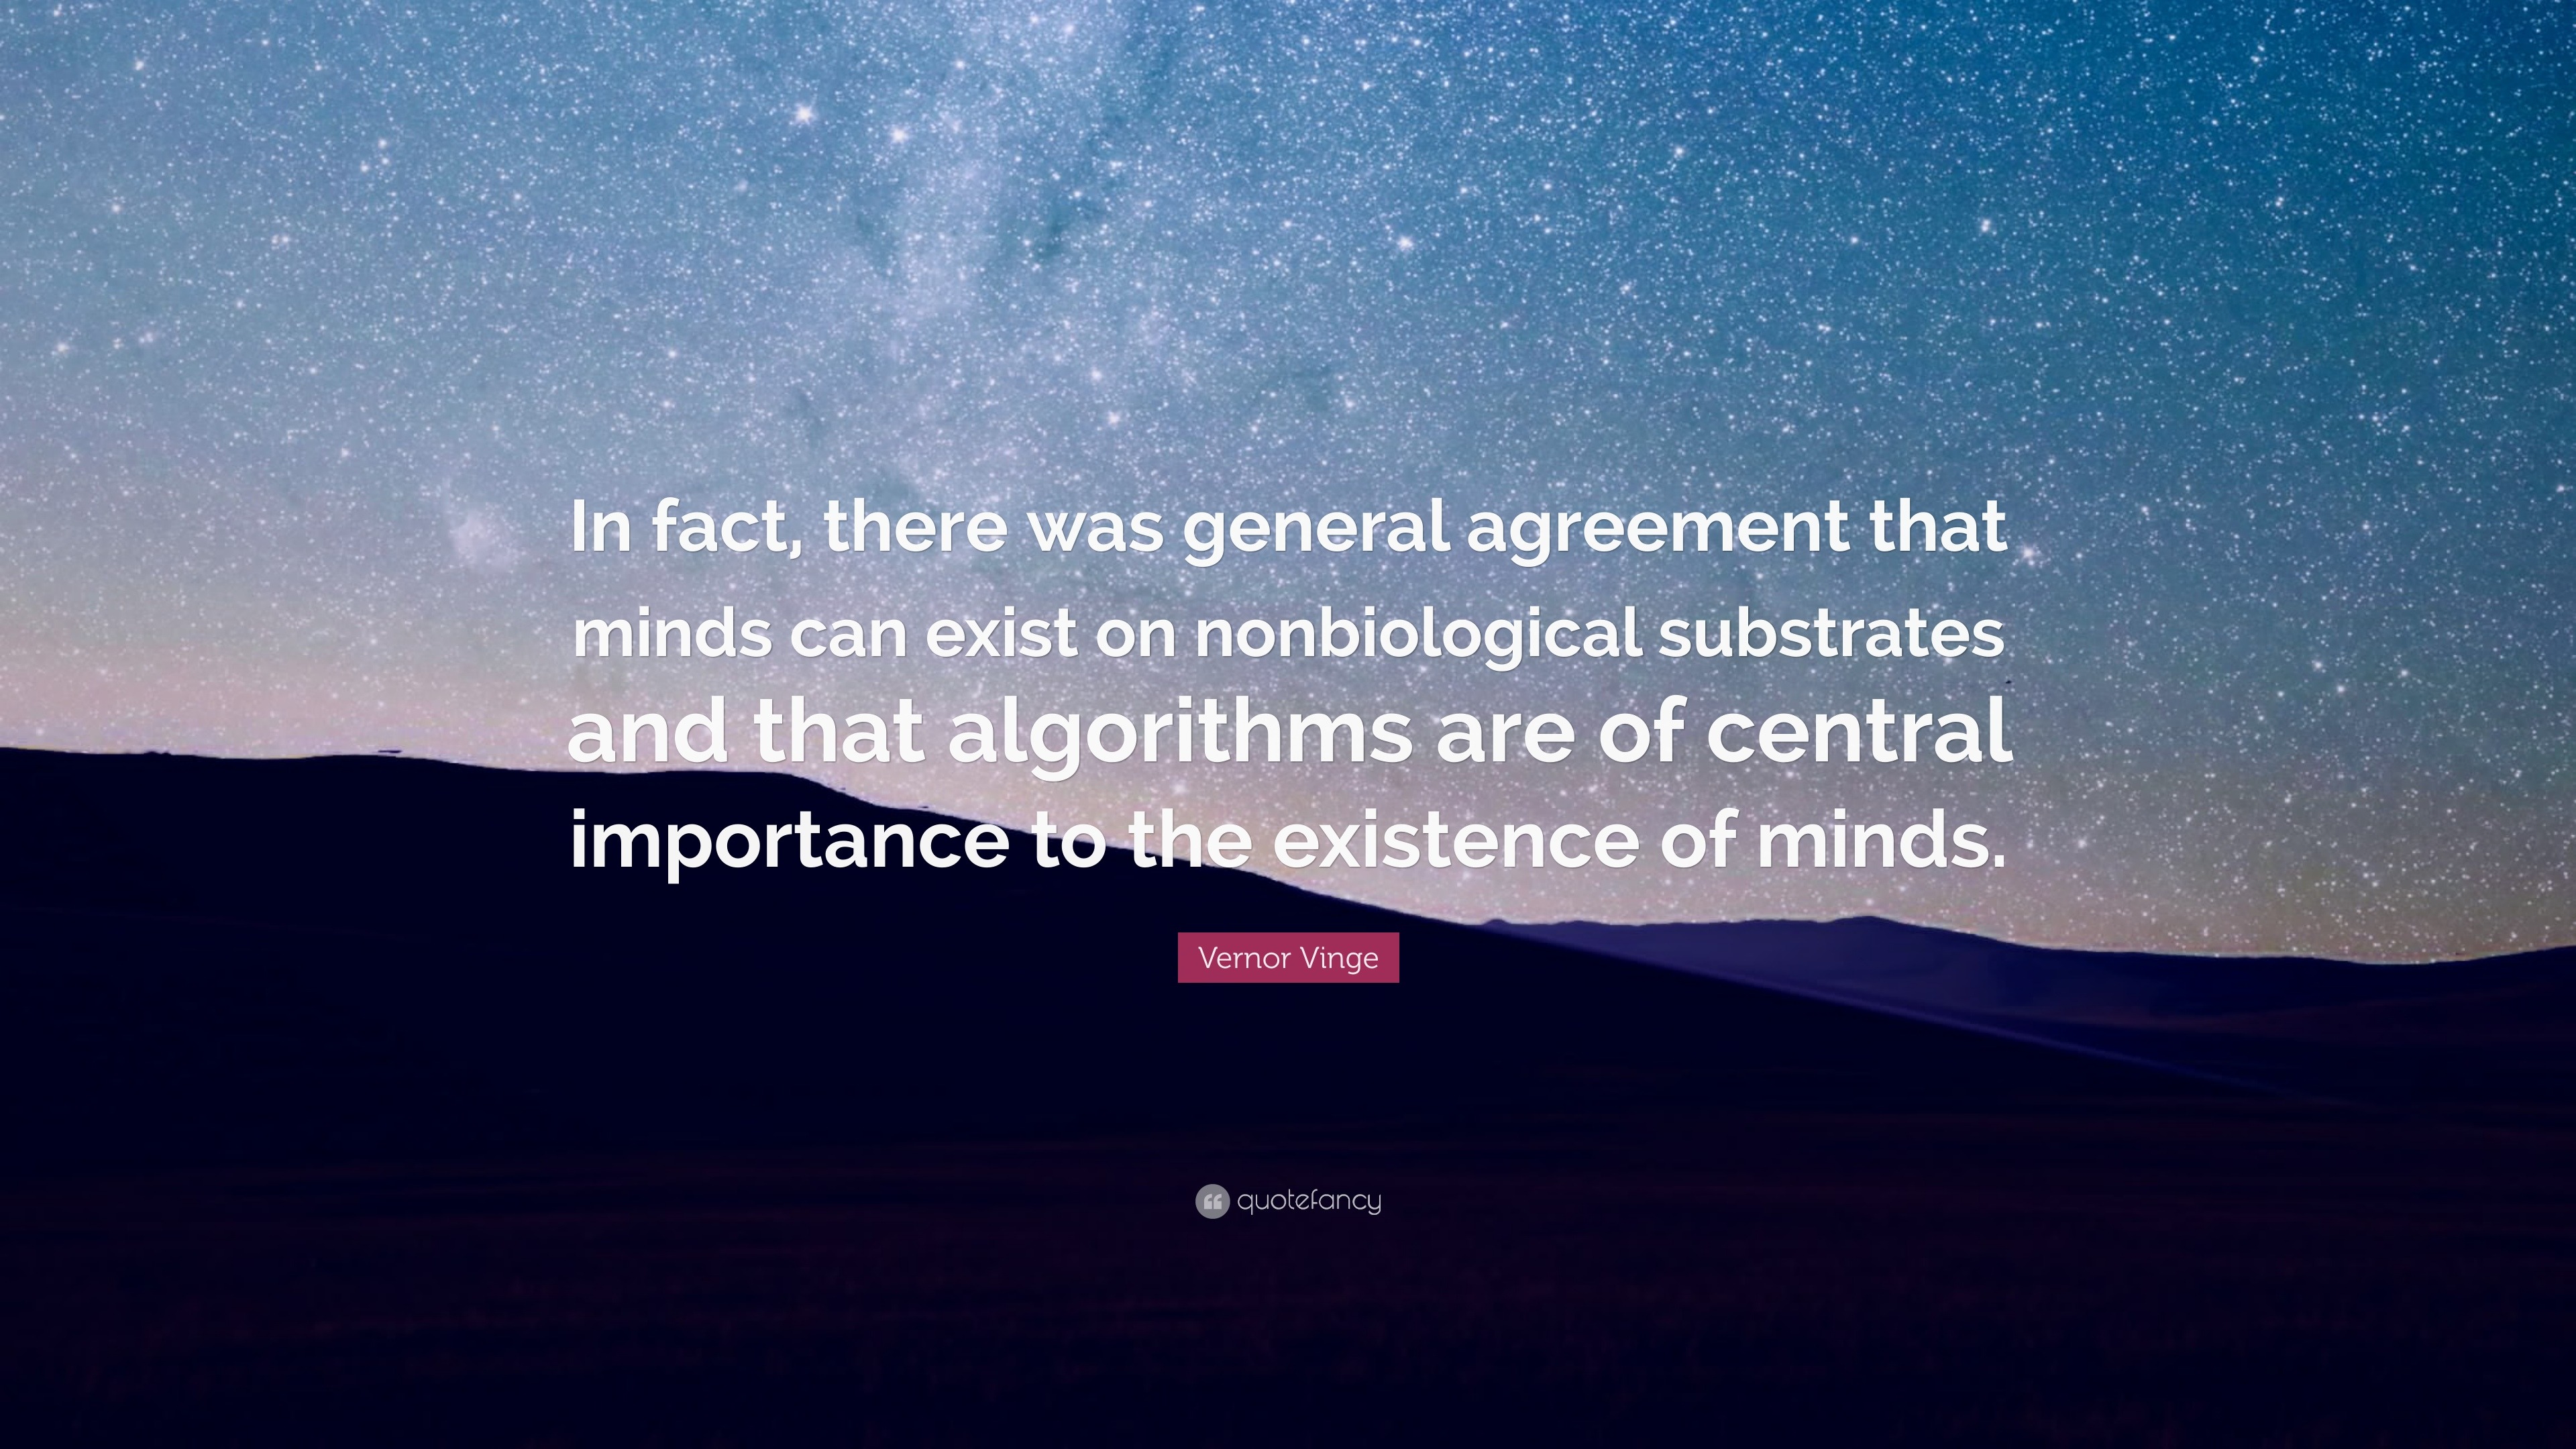 https://quotefancy.com/media/wallpaper/3840x2160/1124309-Vernor-Vinge-Quote-In-fact-there-was-general-agreement-that-minds.jpg